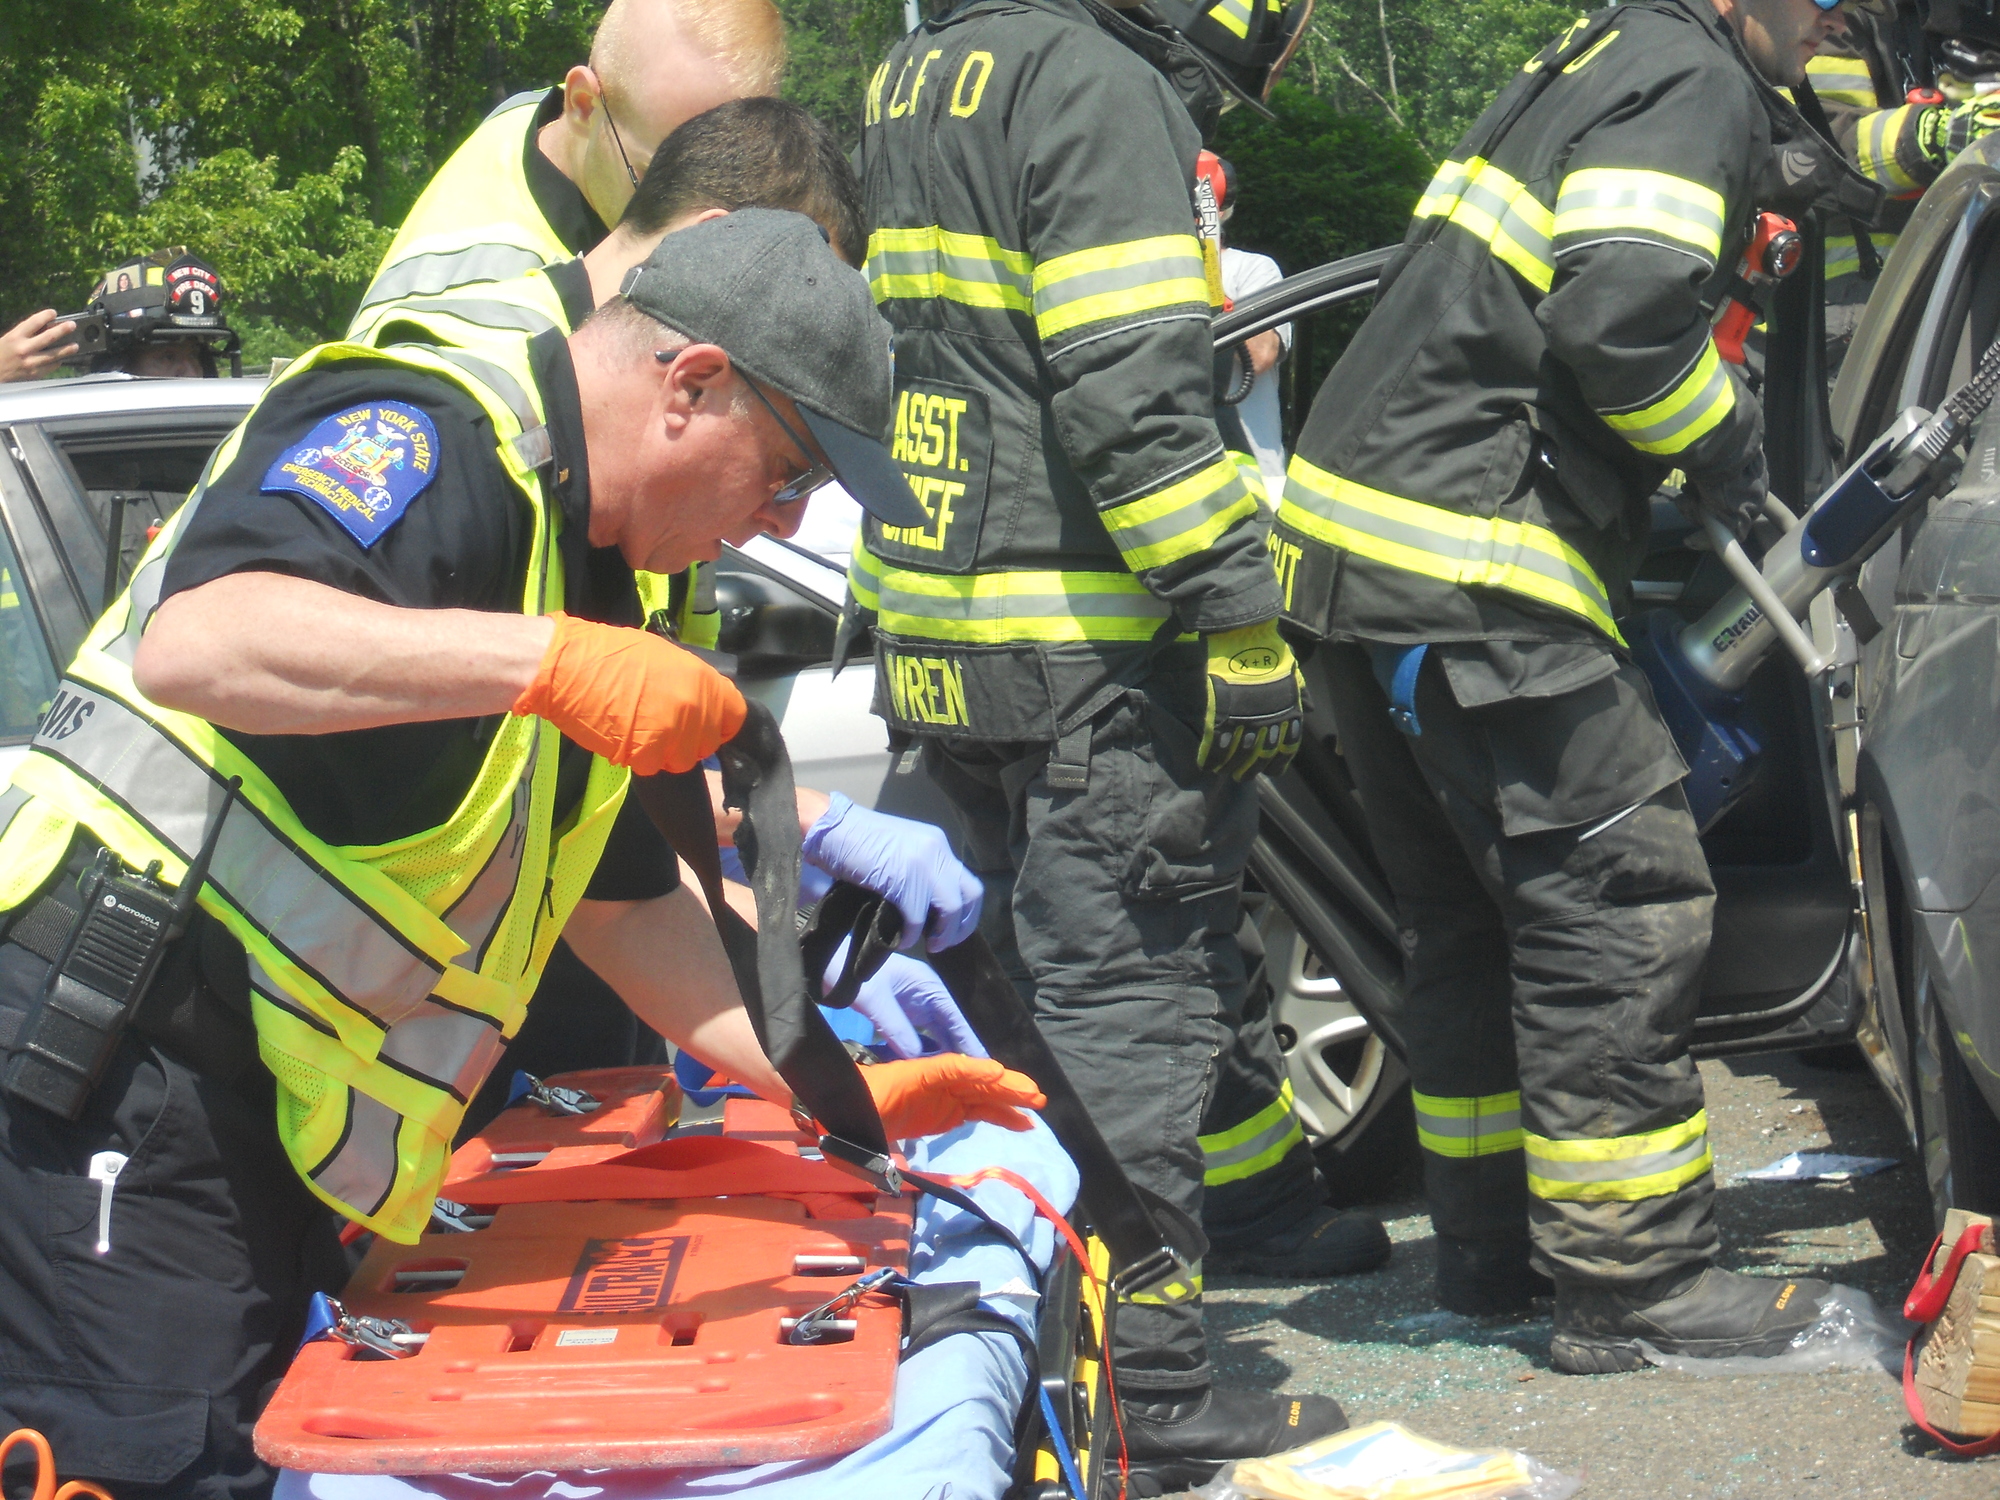 Town of Clarkstown and District Attorney Hold DWI Accident Scene Demonstration